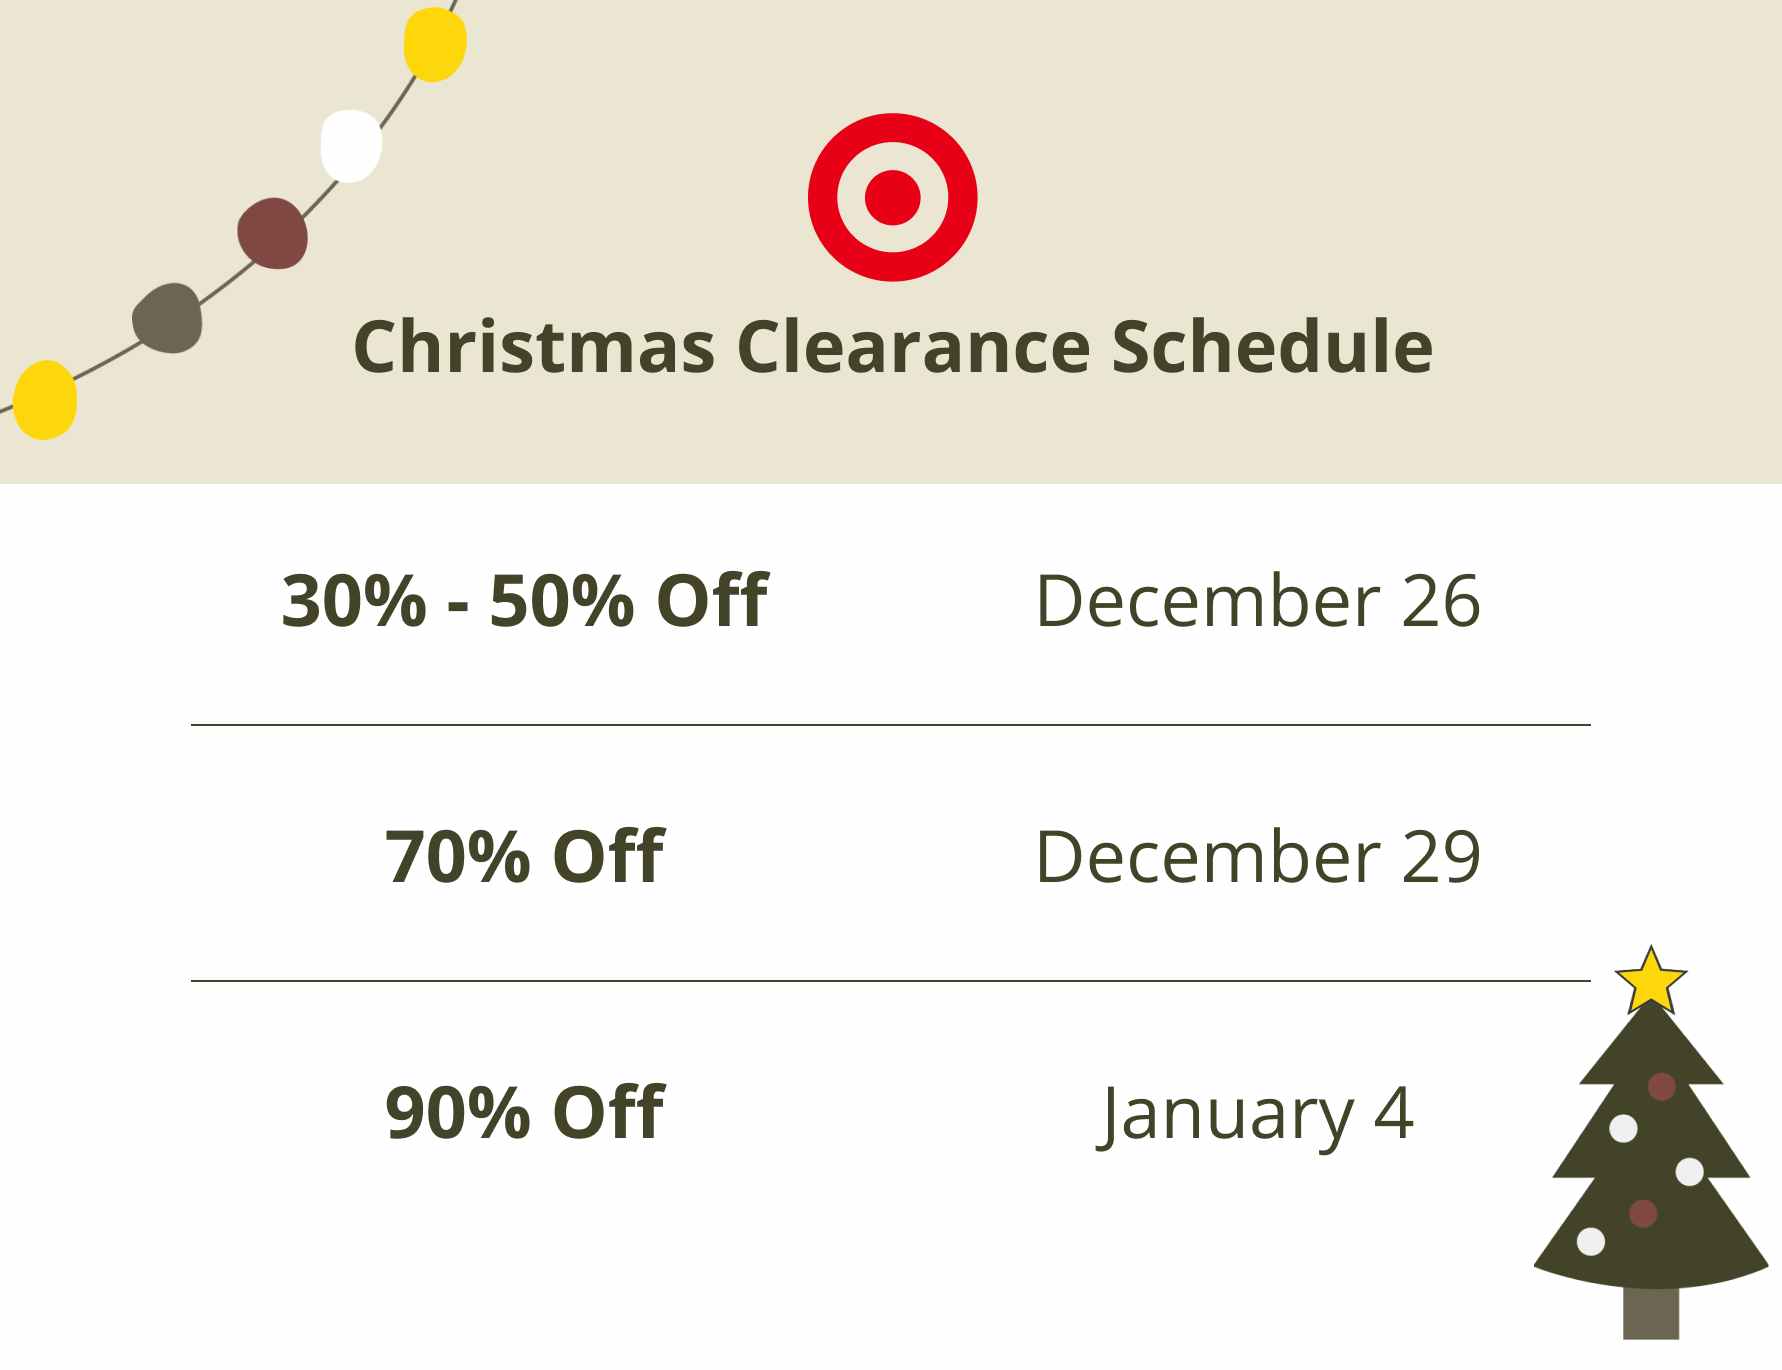 A graphic showing the Target christmas clearance markdown schedule. December 26: 30% - 50% off. December 29: 70% off. January 4: 90% off